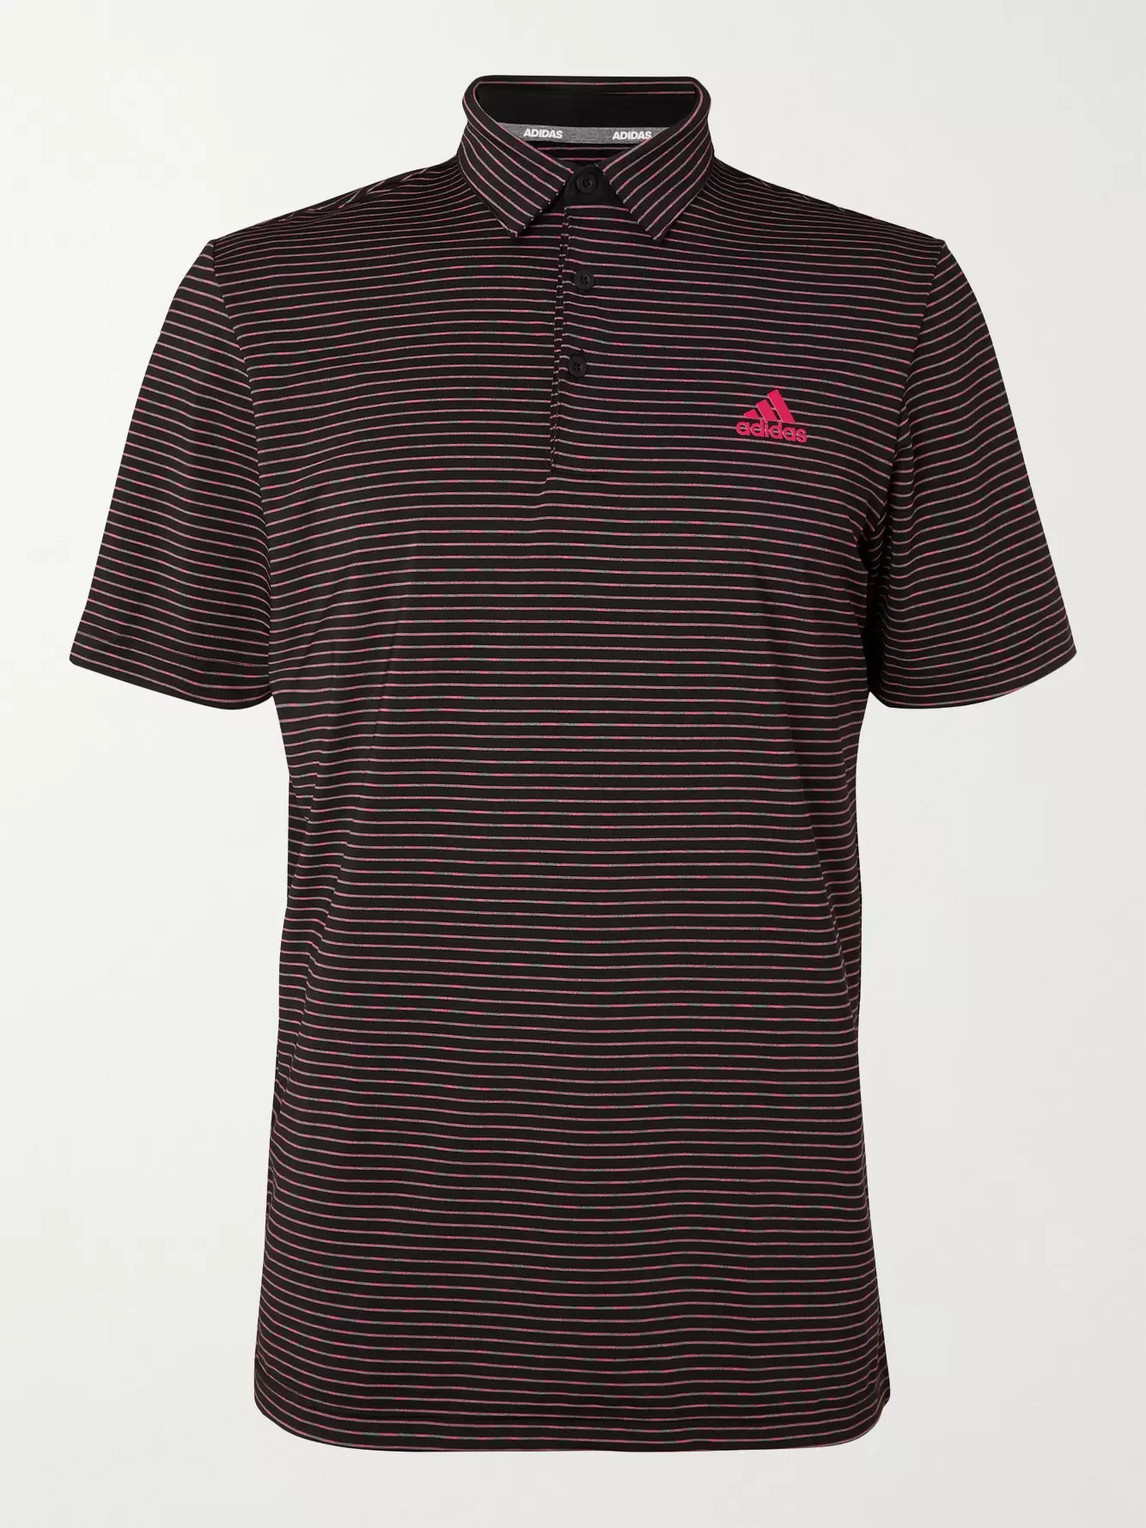 Adidas Golf Ultimate365 Space-dyed Striped Stretch-jersey Golf Polo Shirt In Black